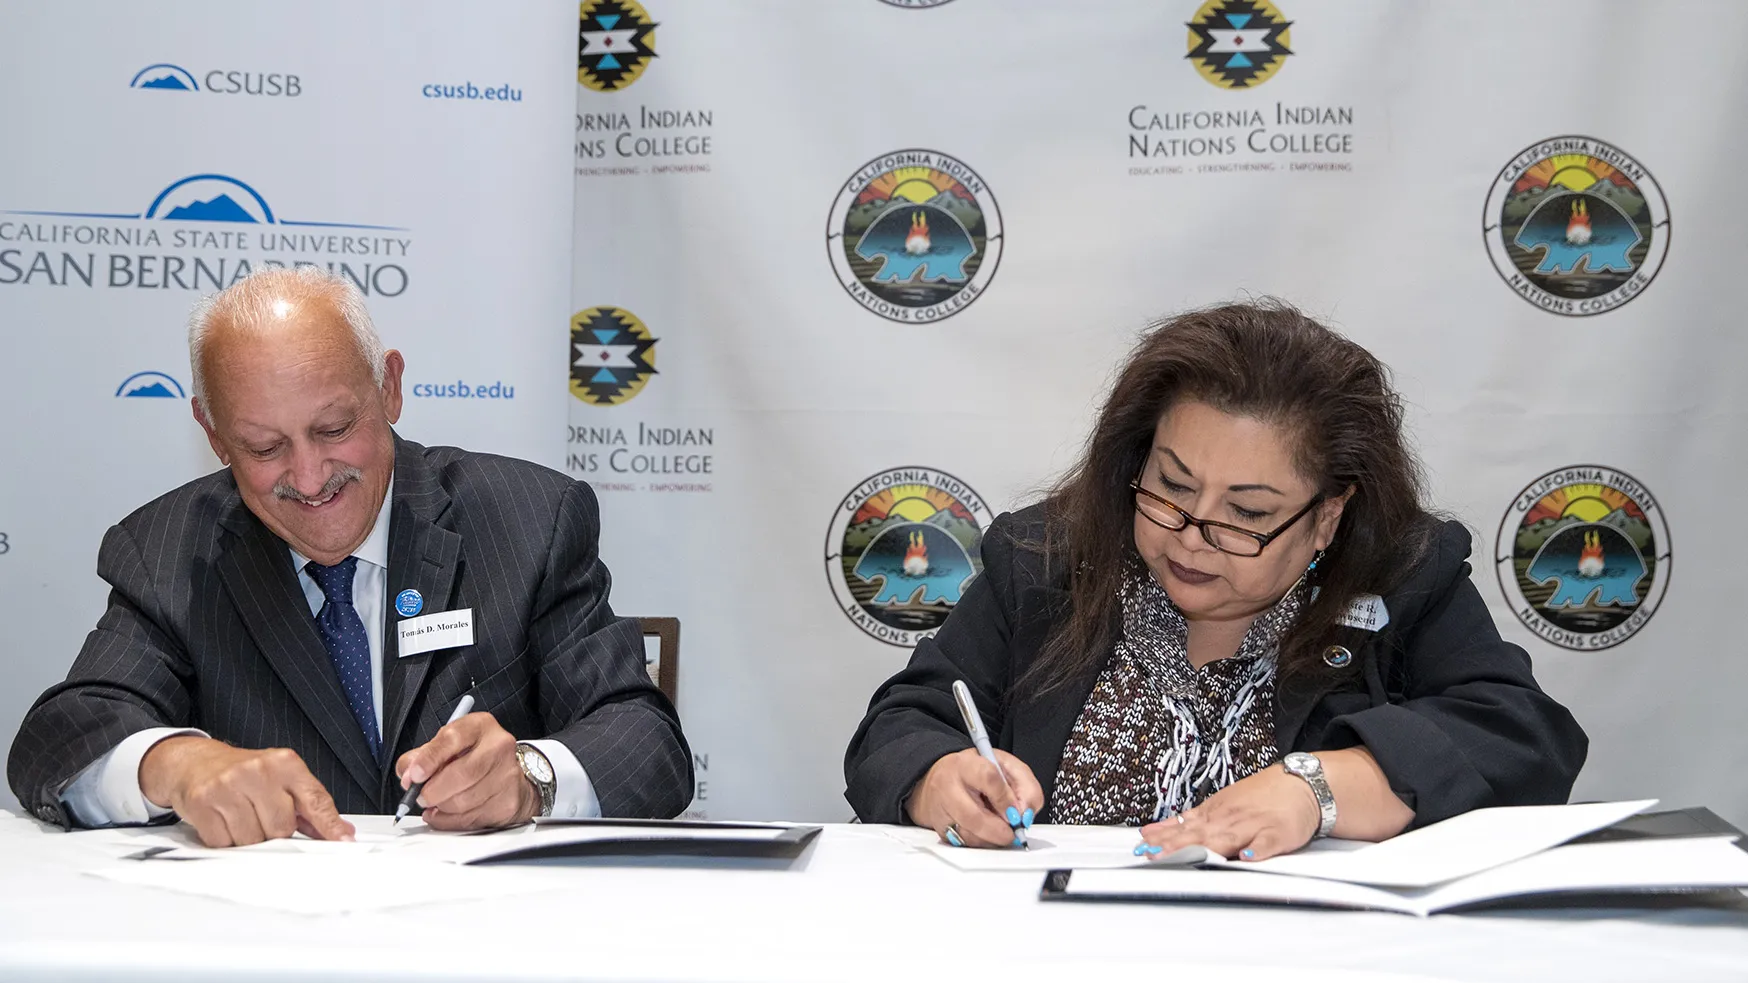 Tomás D. Morales, left, President of California State University, San Bernardino, and Celeste Townsend, President and Chief Executive Officer, California Indian Nations College, sign an MOU at Classic Club in Palm Desert, on Tuesday, October 4, 2022.